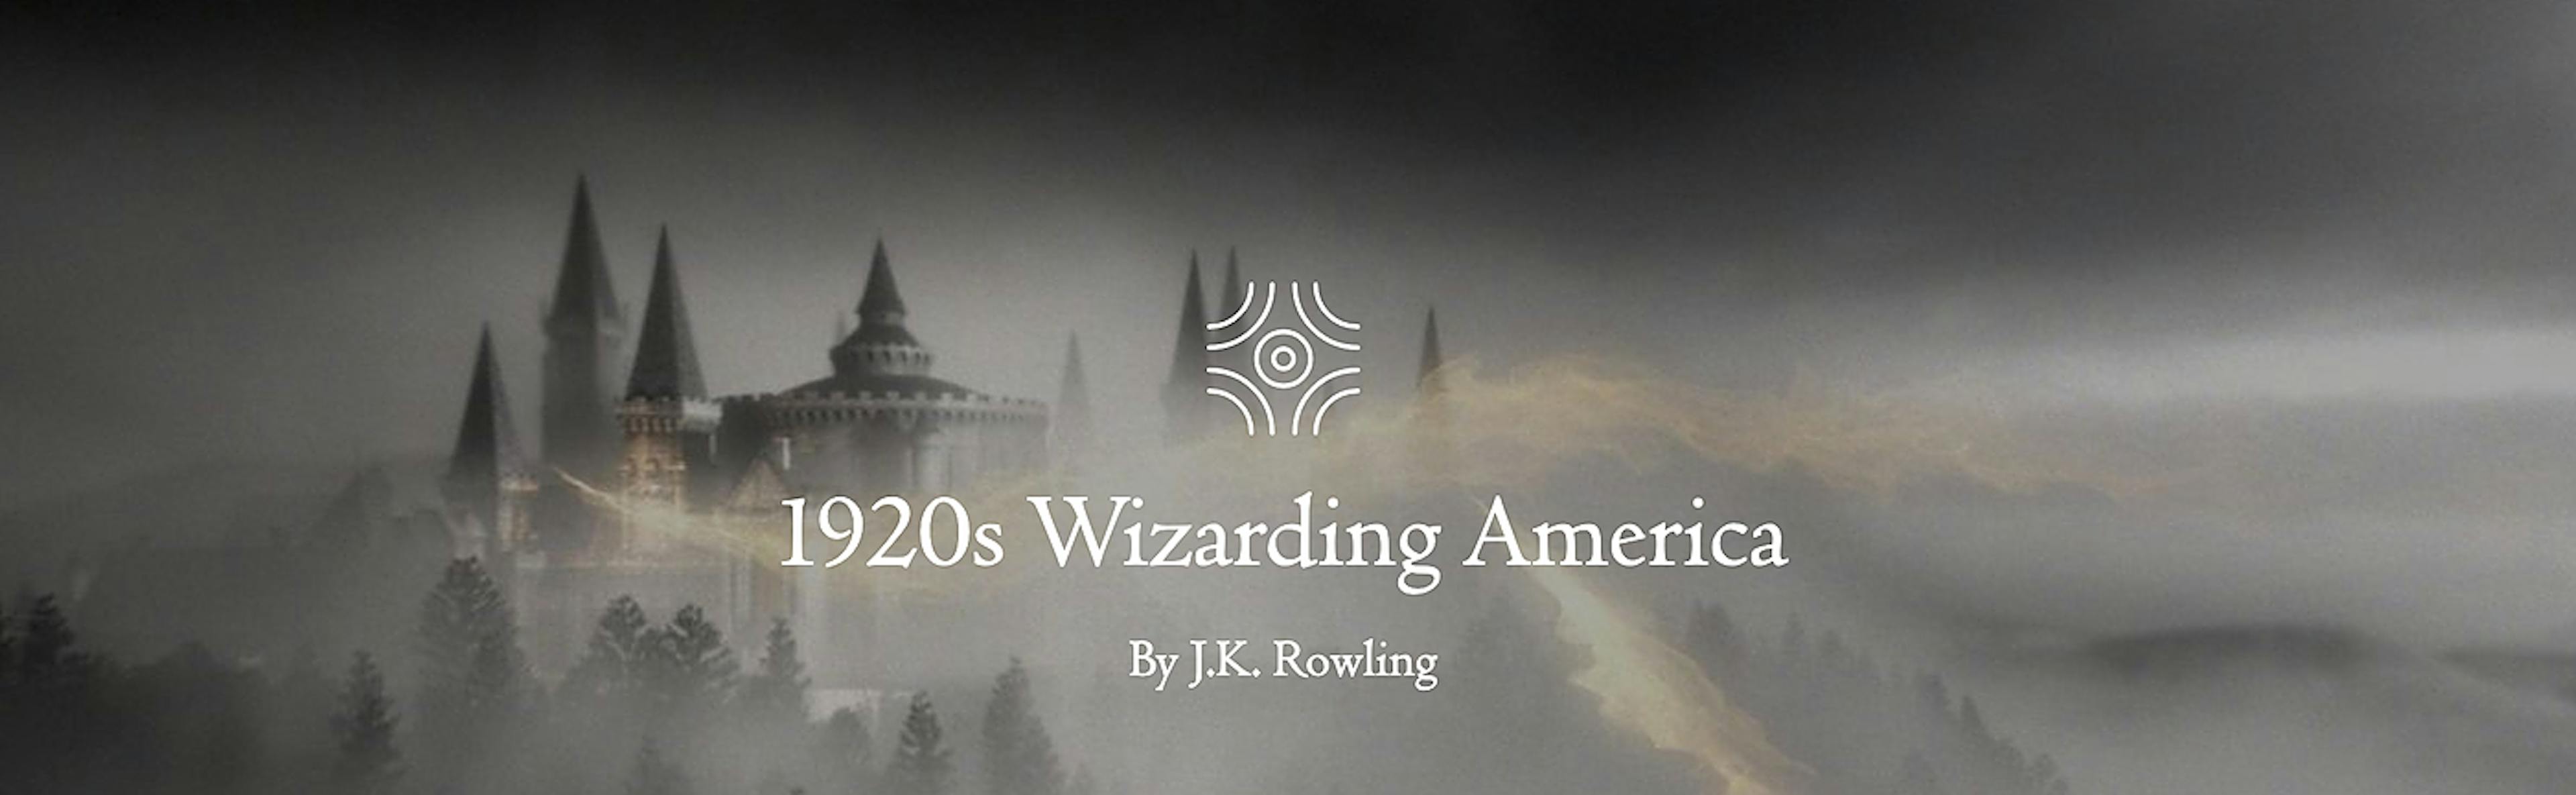 /1920s-wizarding-america-yb1y3z01 feature image